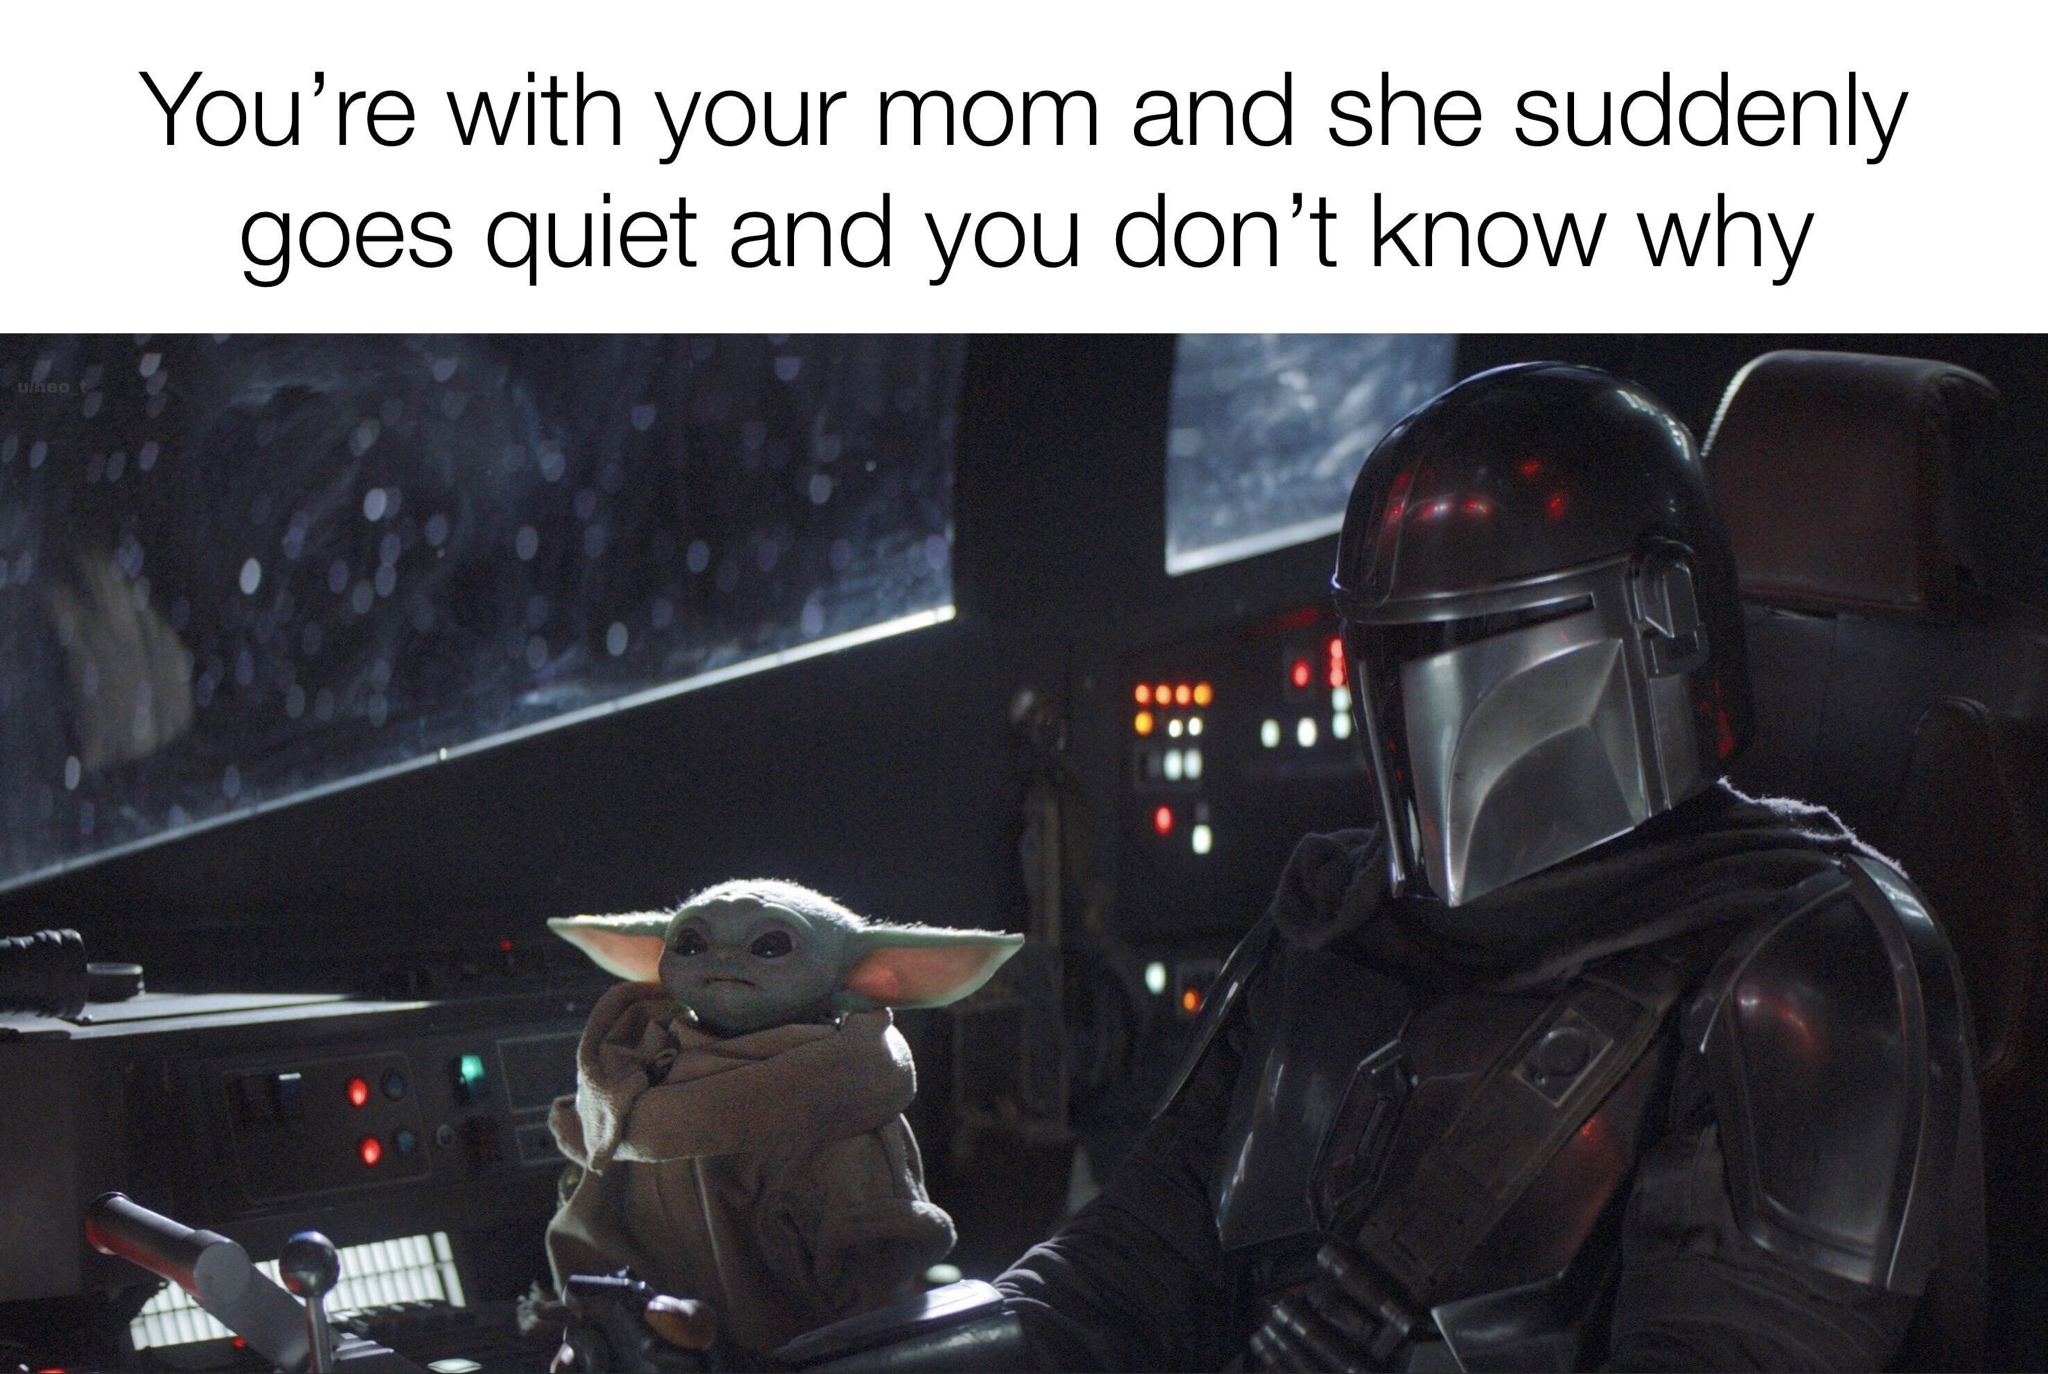 mandalorian baby yoda - You're with your mom and she suddenly goes quiet and you don't know why emed